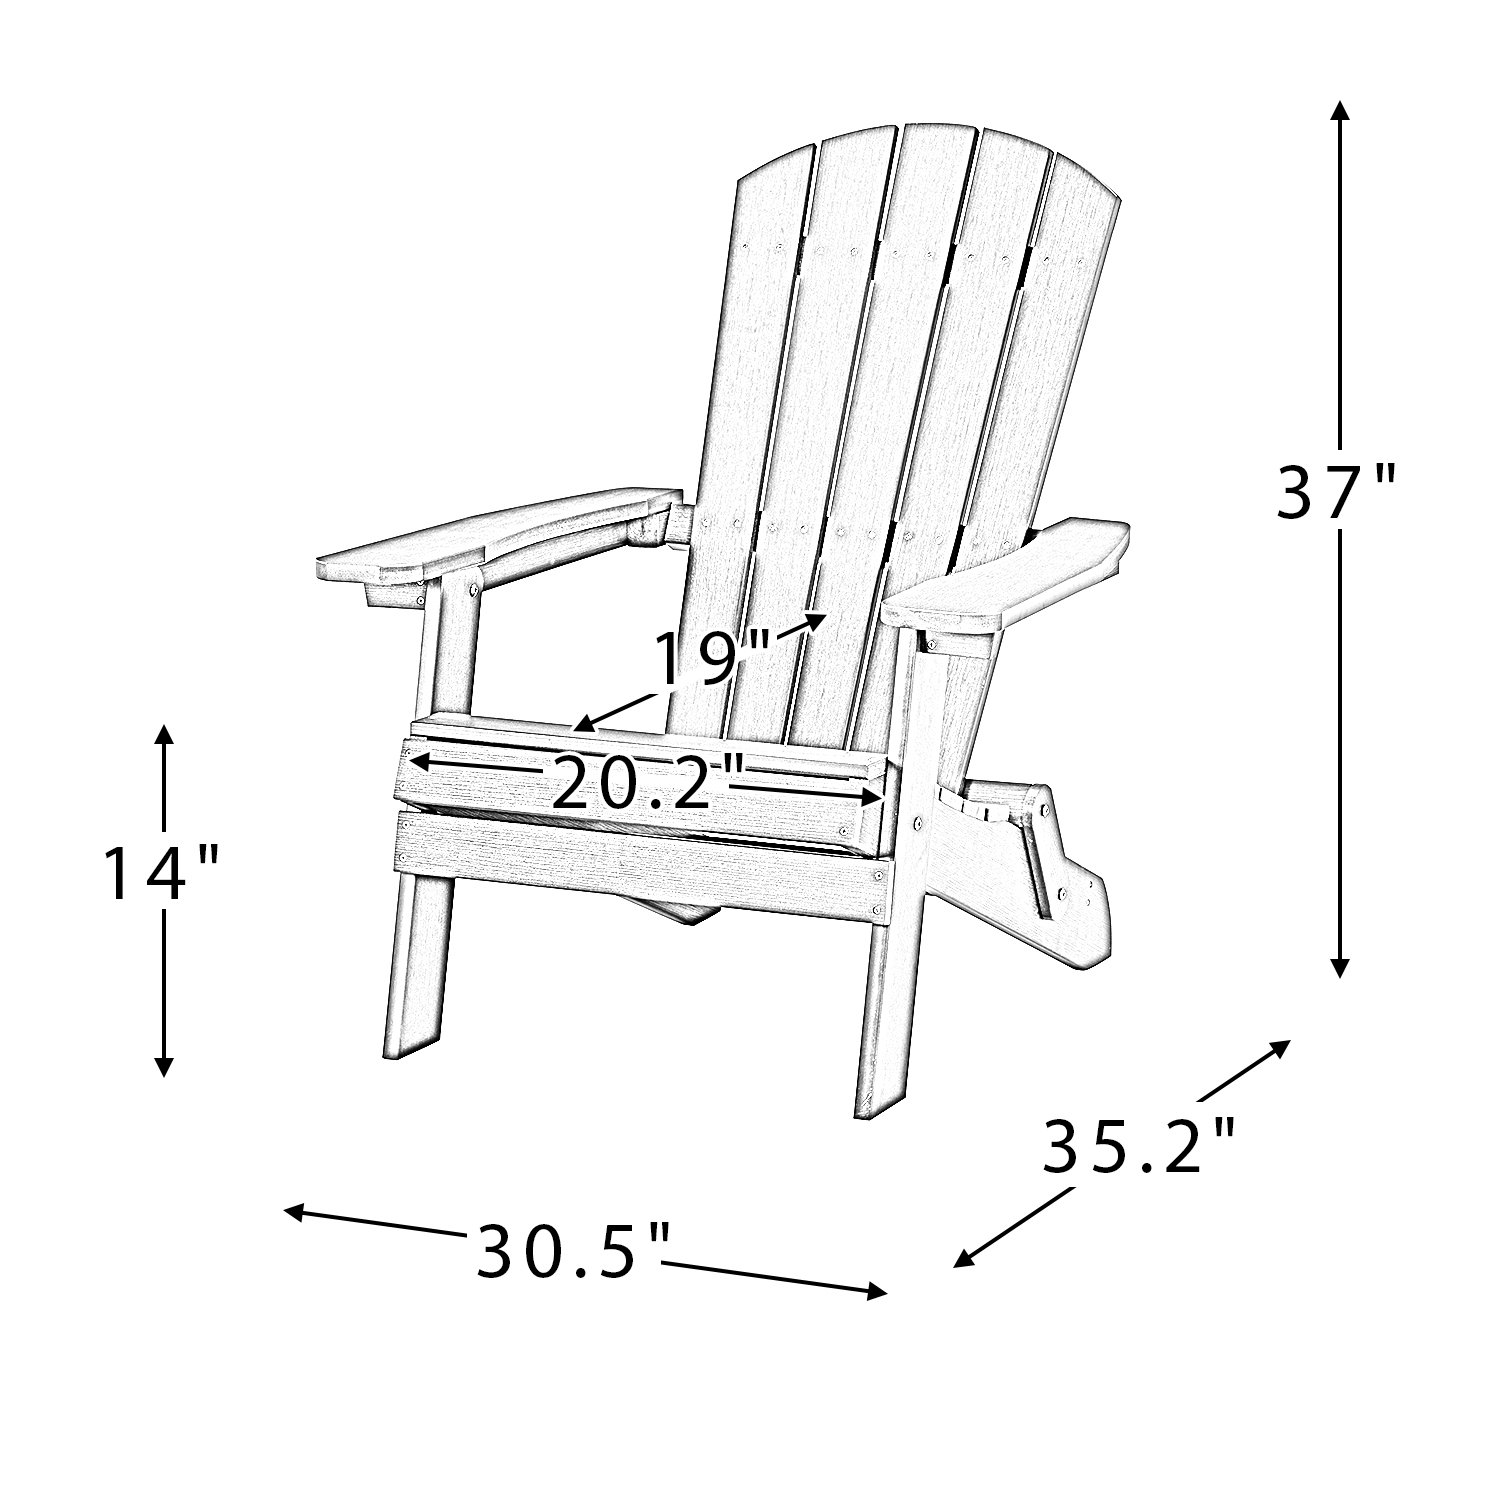 Folding Plastic Chair,Folding All-Weather Patio Chair,High Back Plastic Resin Deck Chair,Painted Weather Resistant Chair for Garden Backyard Porch,Easy to Fold Move & Maintain,Outdoor Furniture,Brown - image 3 of 7